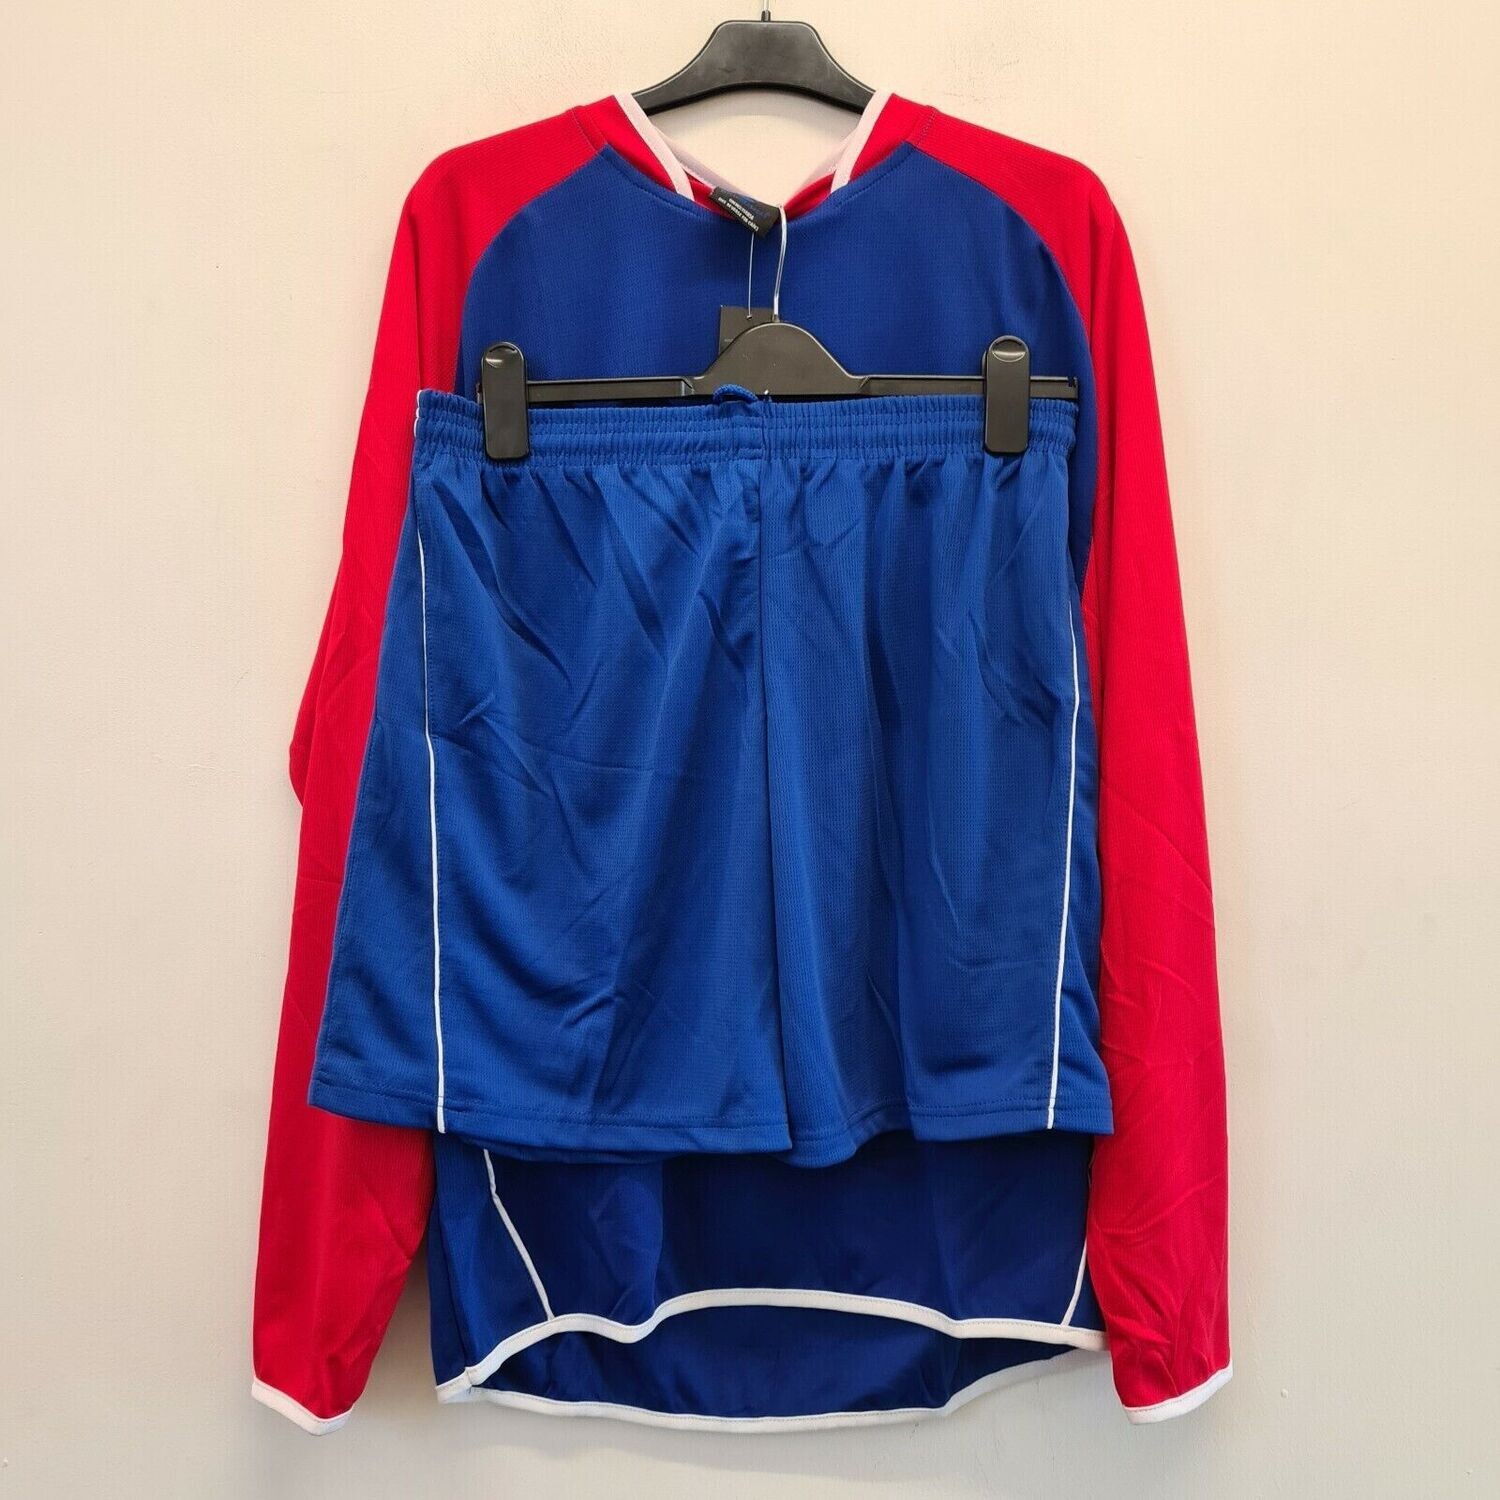 Sports / Football Kit. Clothing for sport. Red / Blue Long sleeves Large